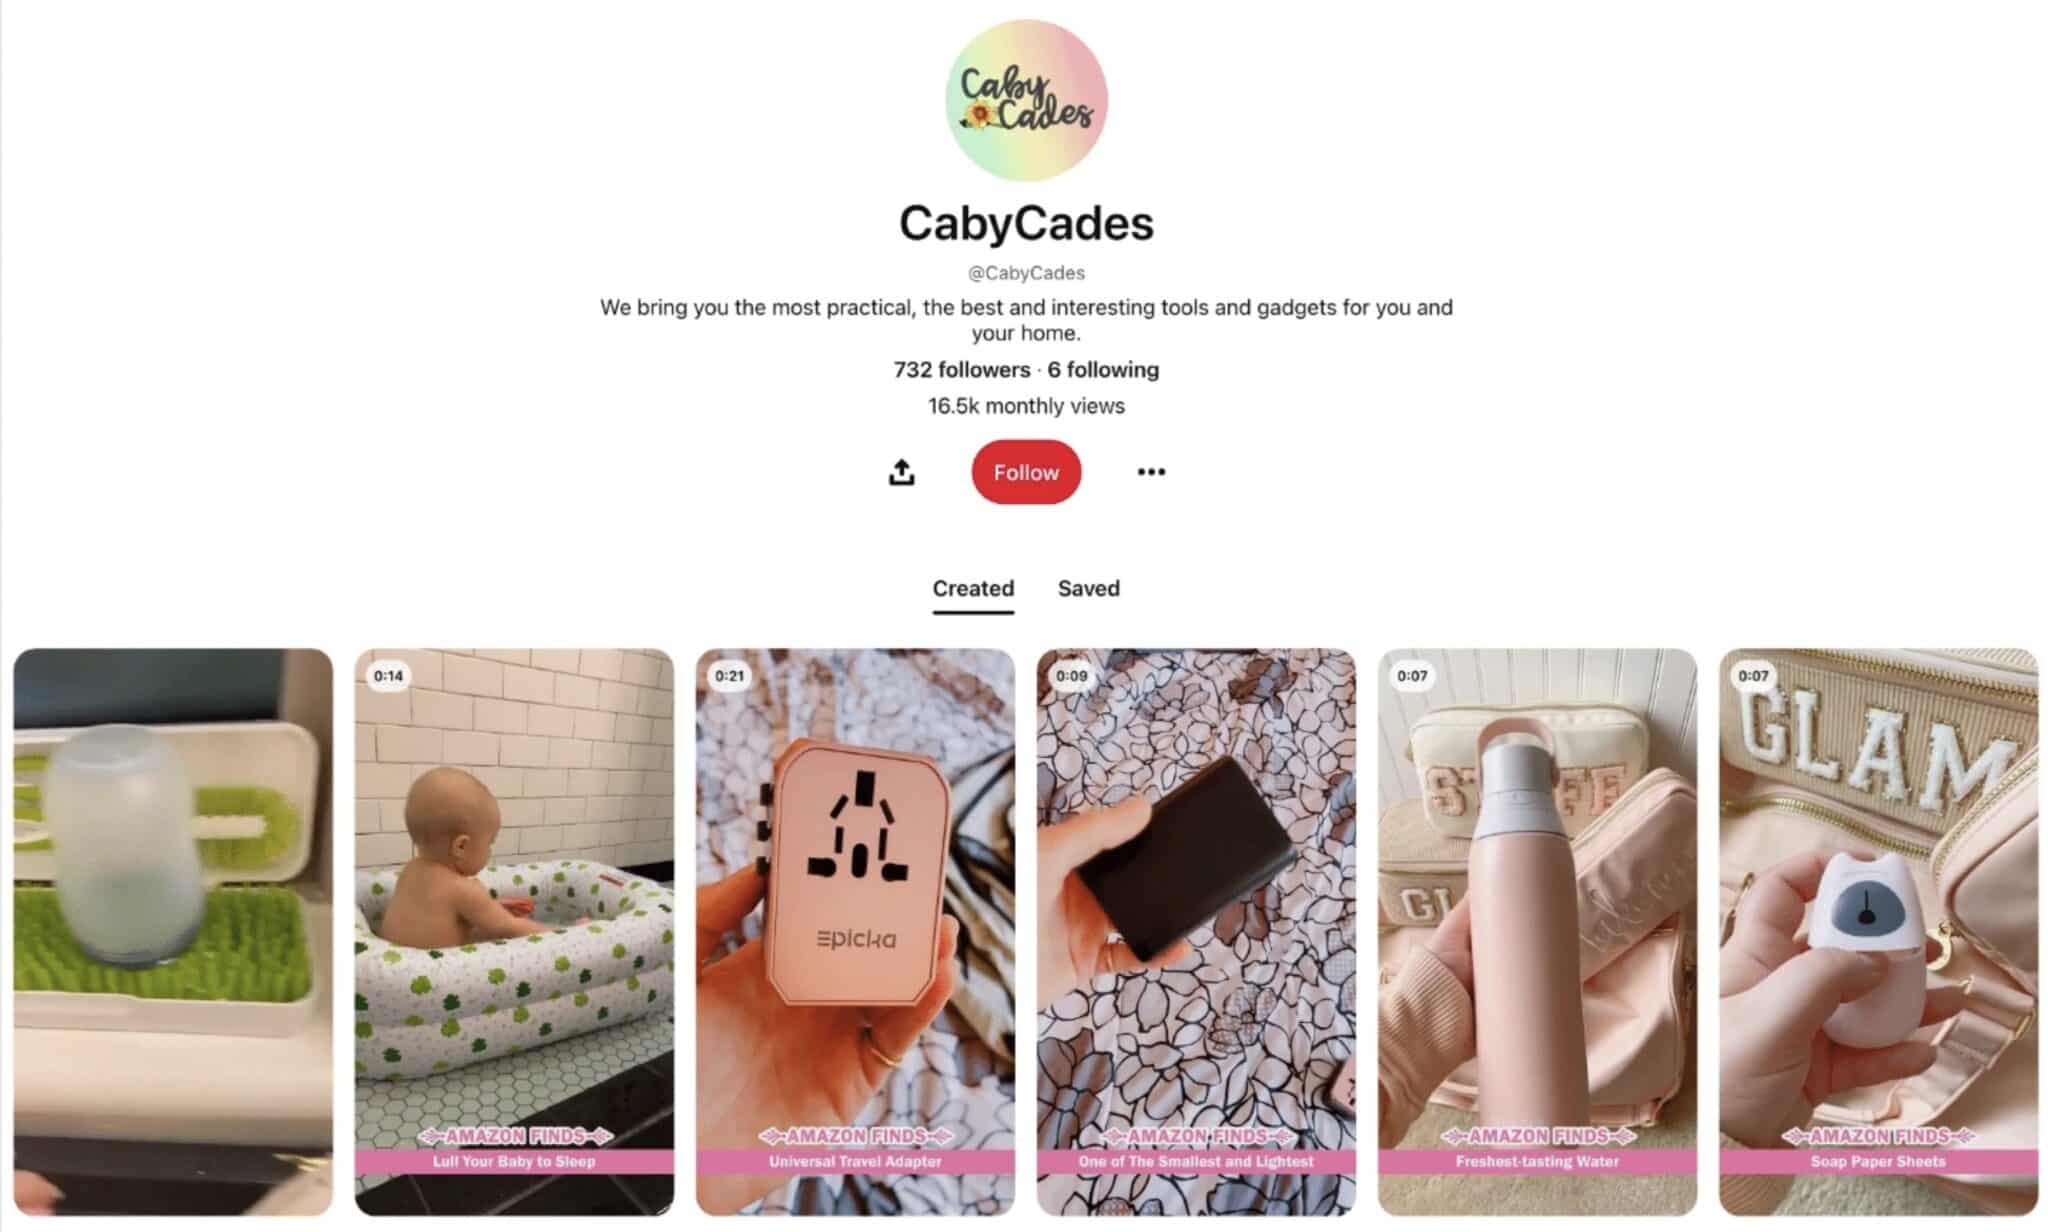 CabyCades, an Amazon affiliate, uses video pins to sell products